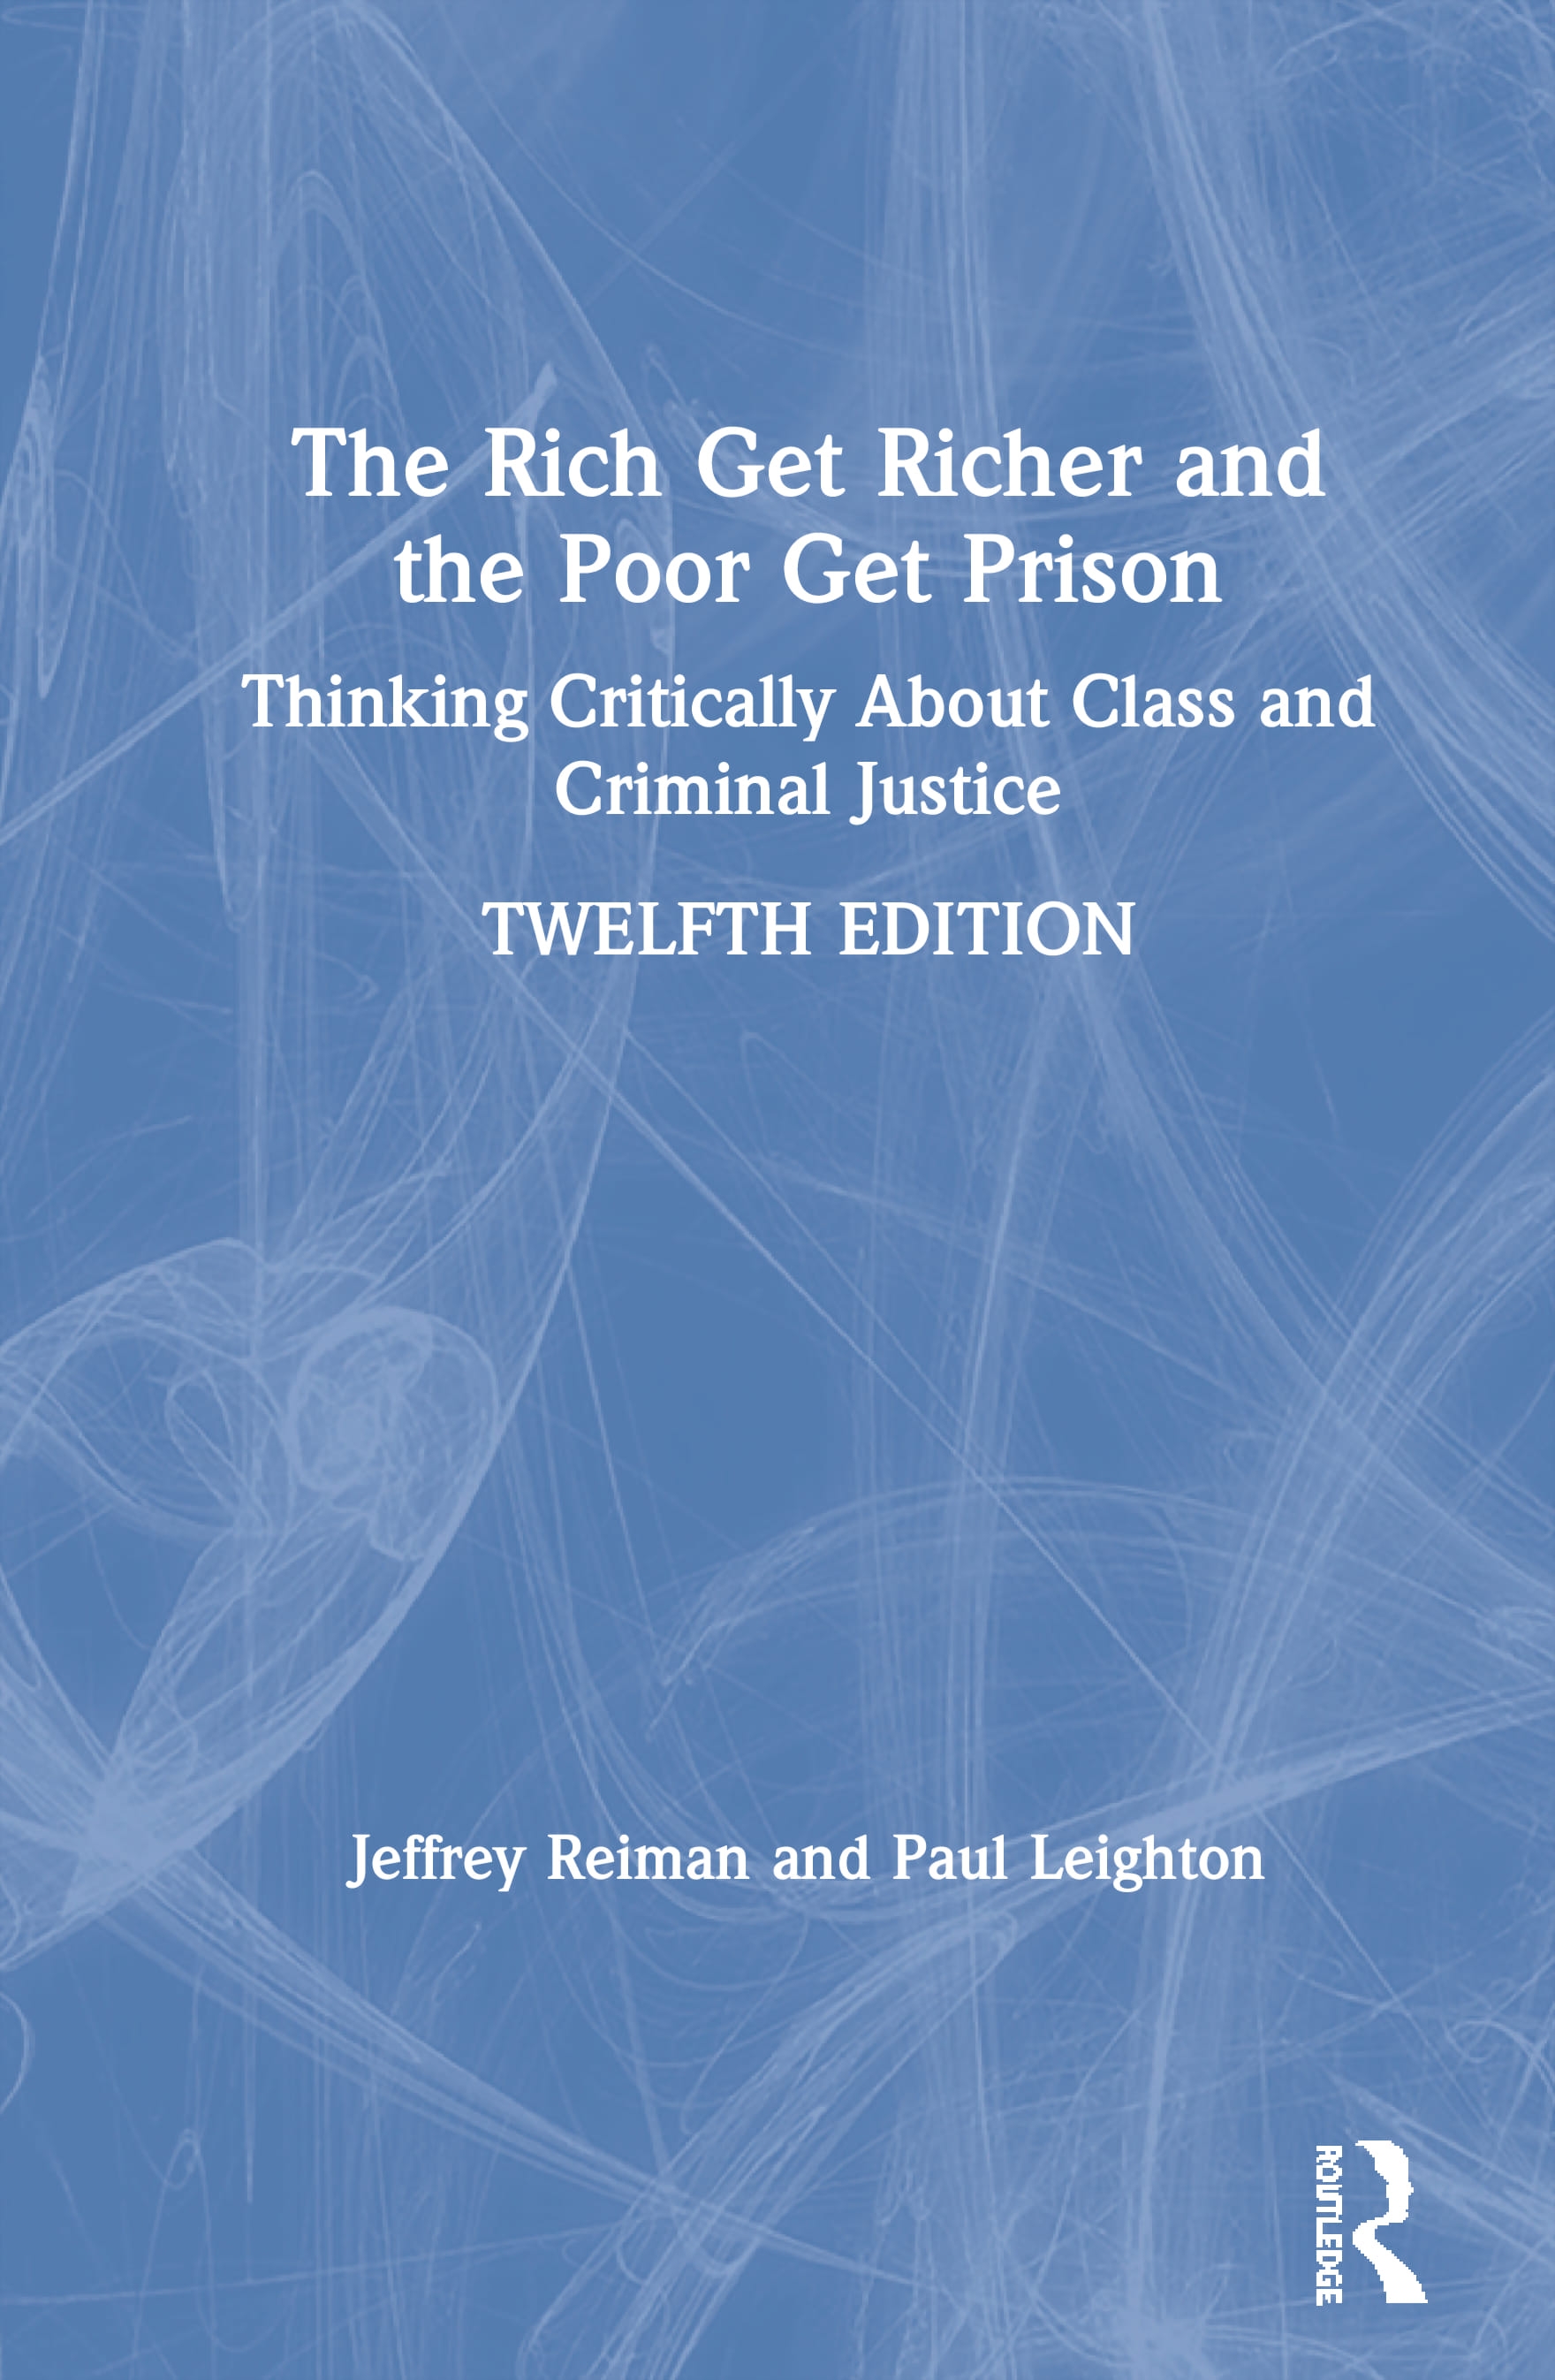 The Rich Get Richer and the Poor Get Prison: Thinking Critically about Class and Criminal Justice